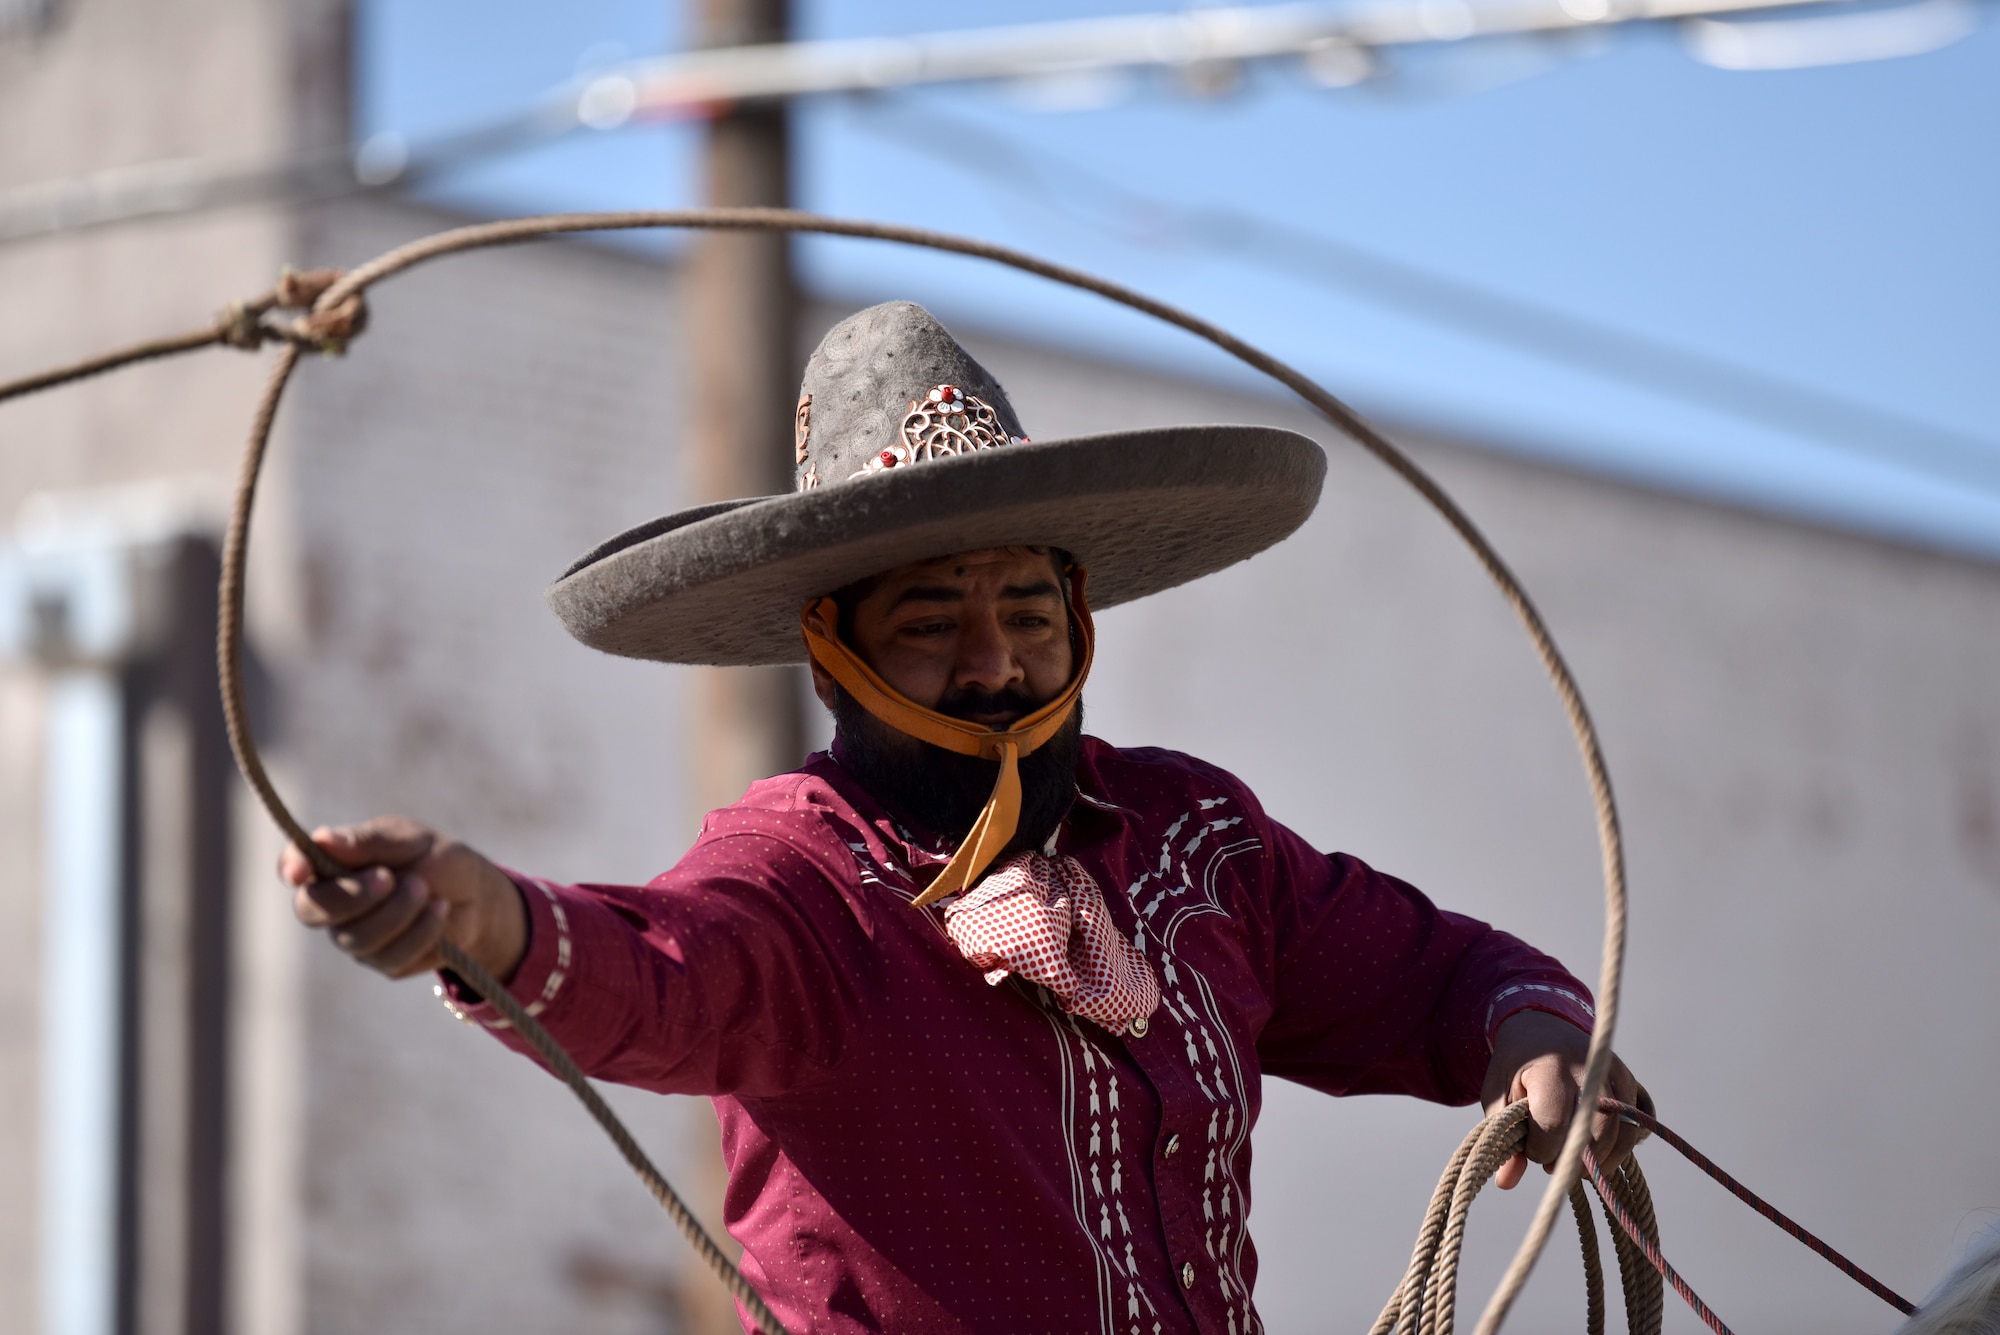 A Charros De Rancho Cabrera contestant performs lasso tricks during the 89th Annual San Angelo Rodeo parade through downtown San Angelo, Texas, April 10, 2021. They won third place in both the 2018 and 2019 rodeo. (U.S. Air Force photo by Staff Sgt. Seraiah Wolf)